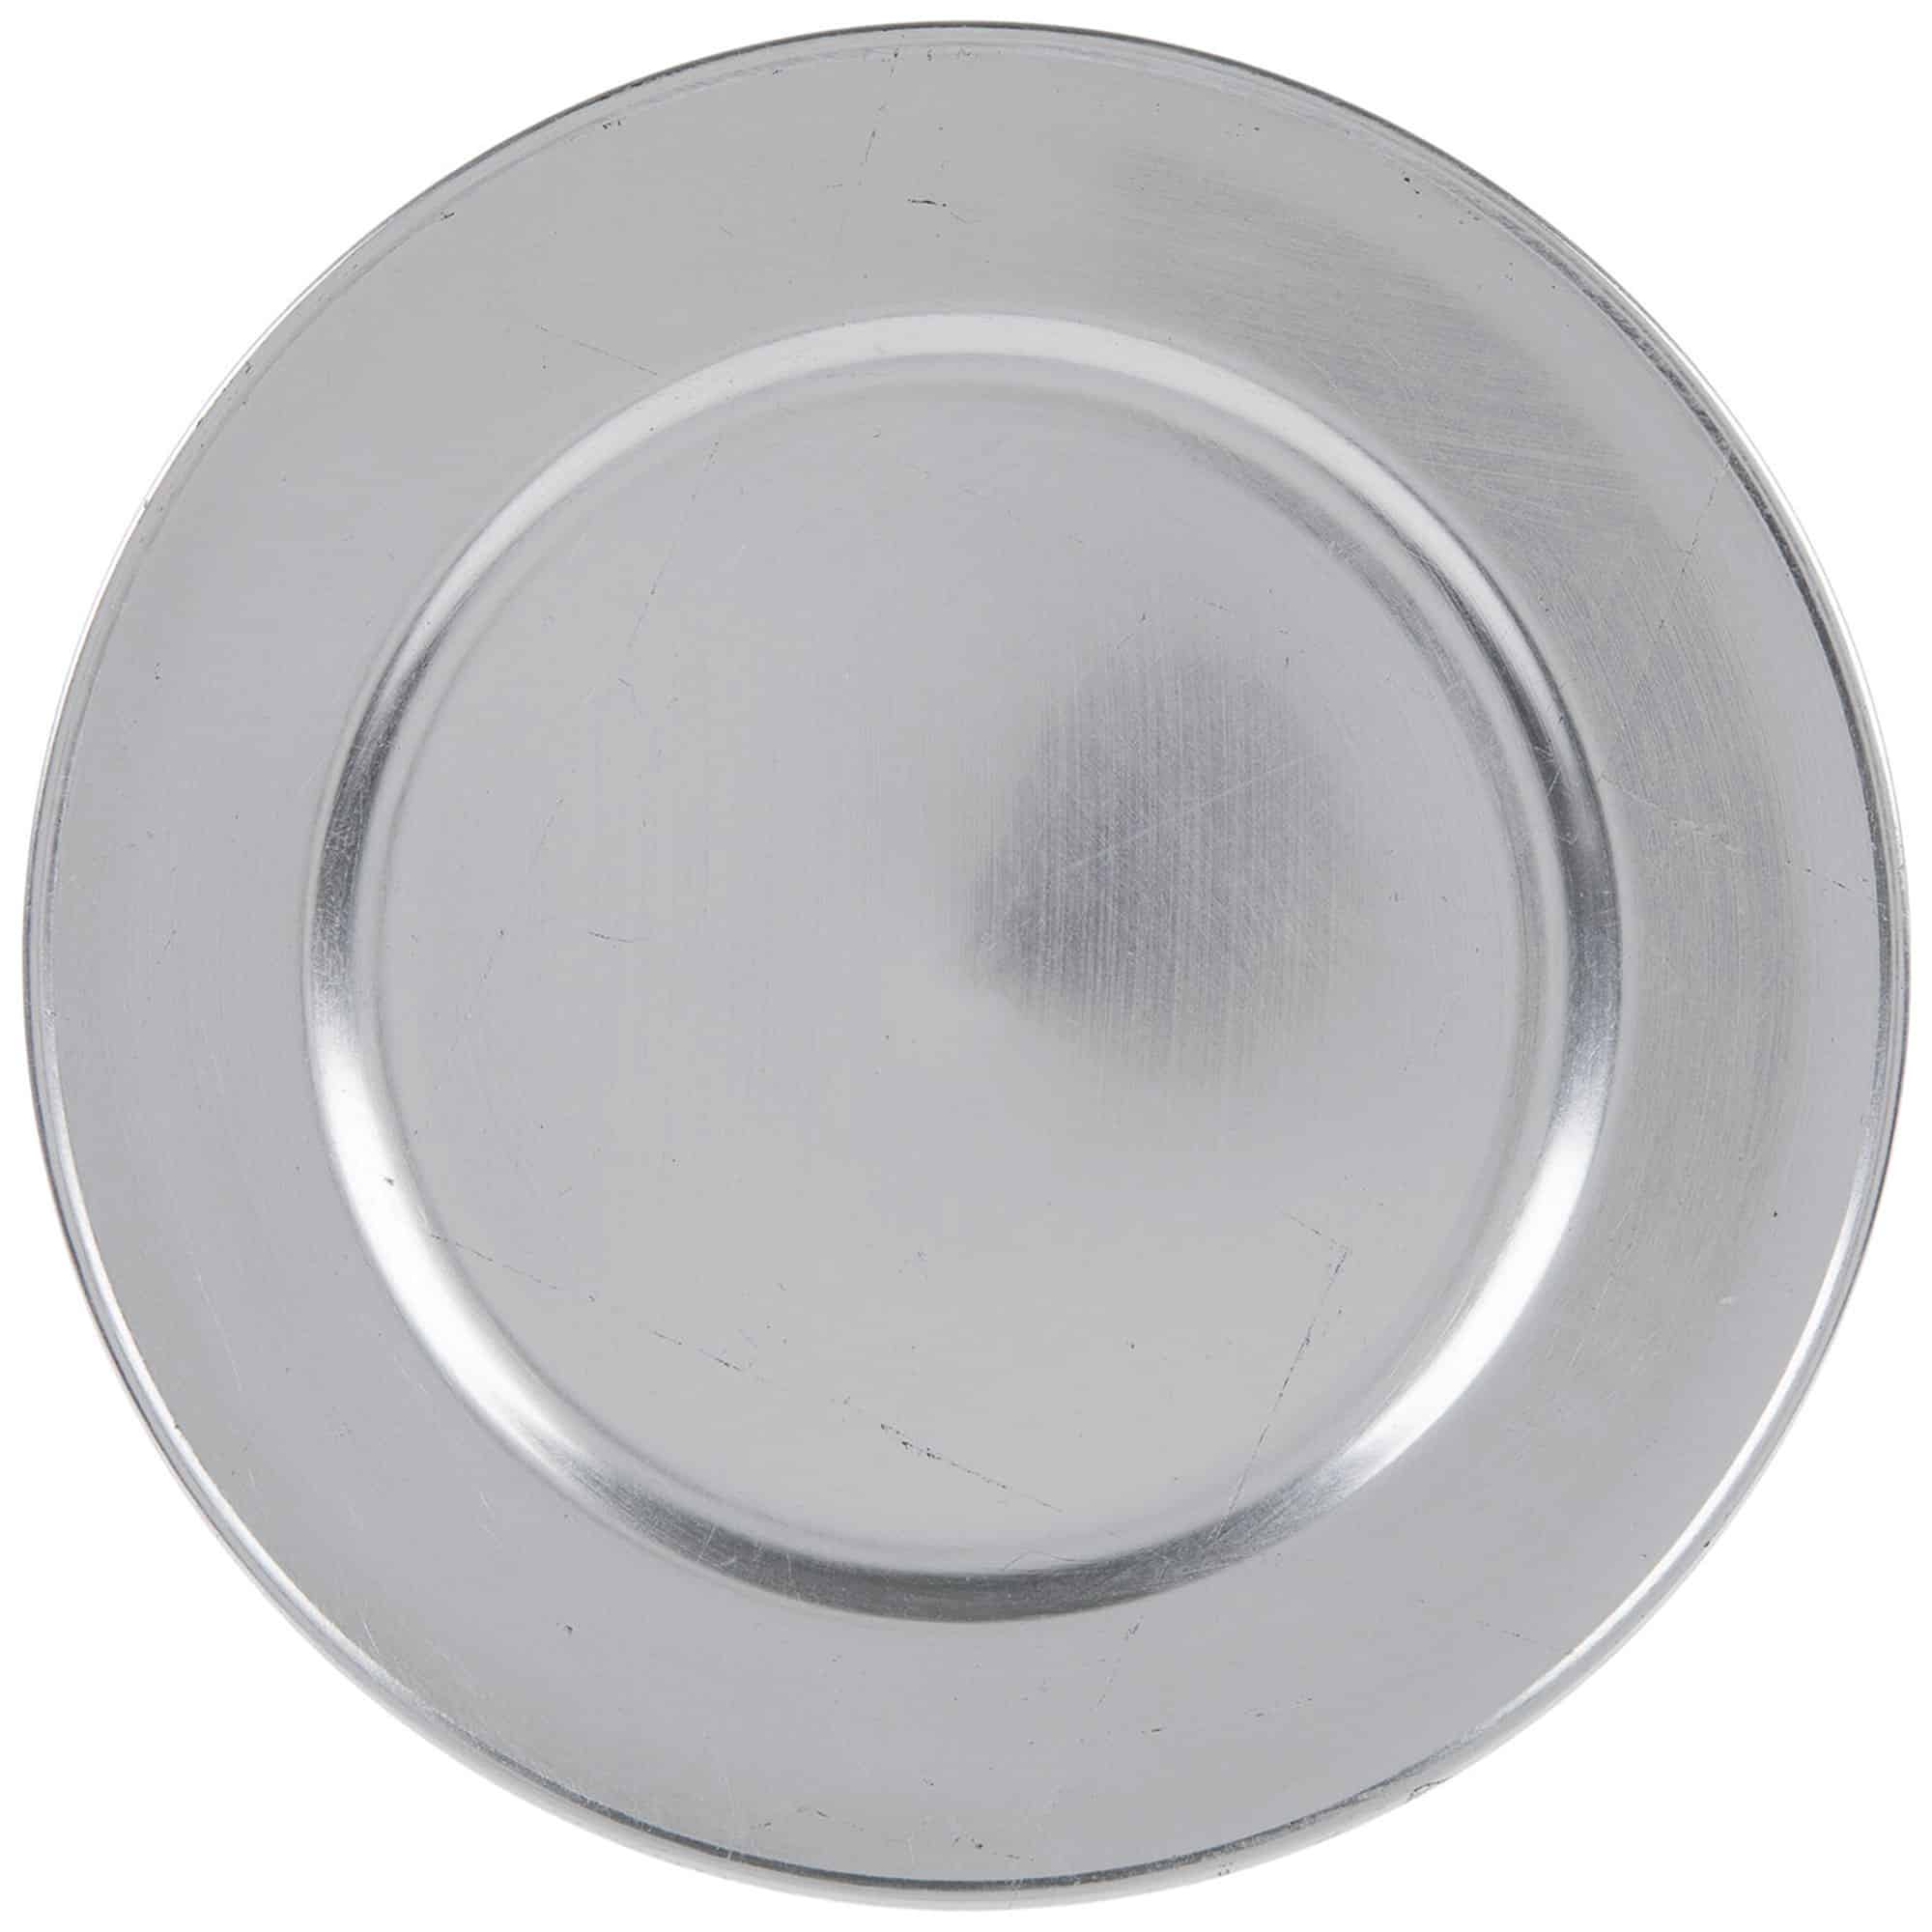 Silver Charger Plate rental